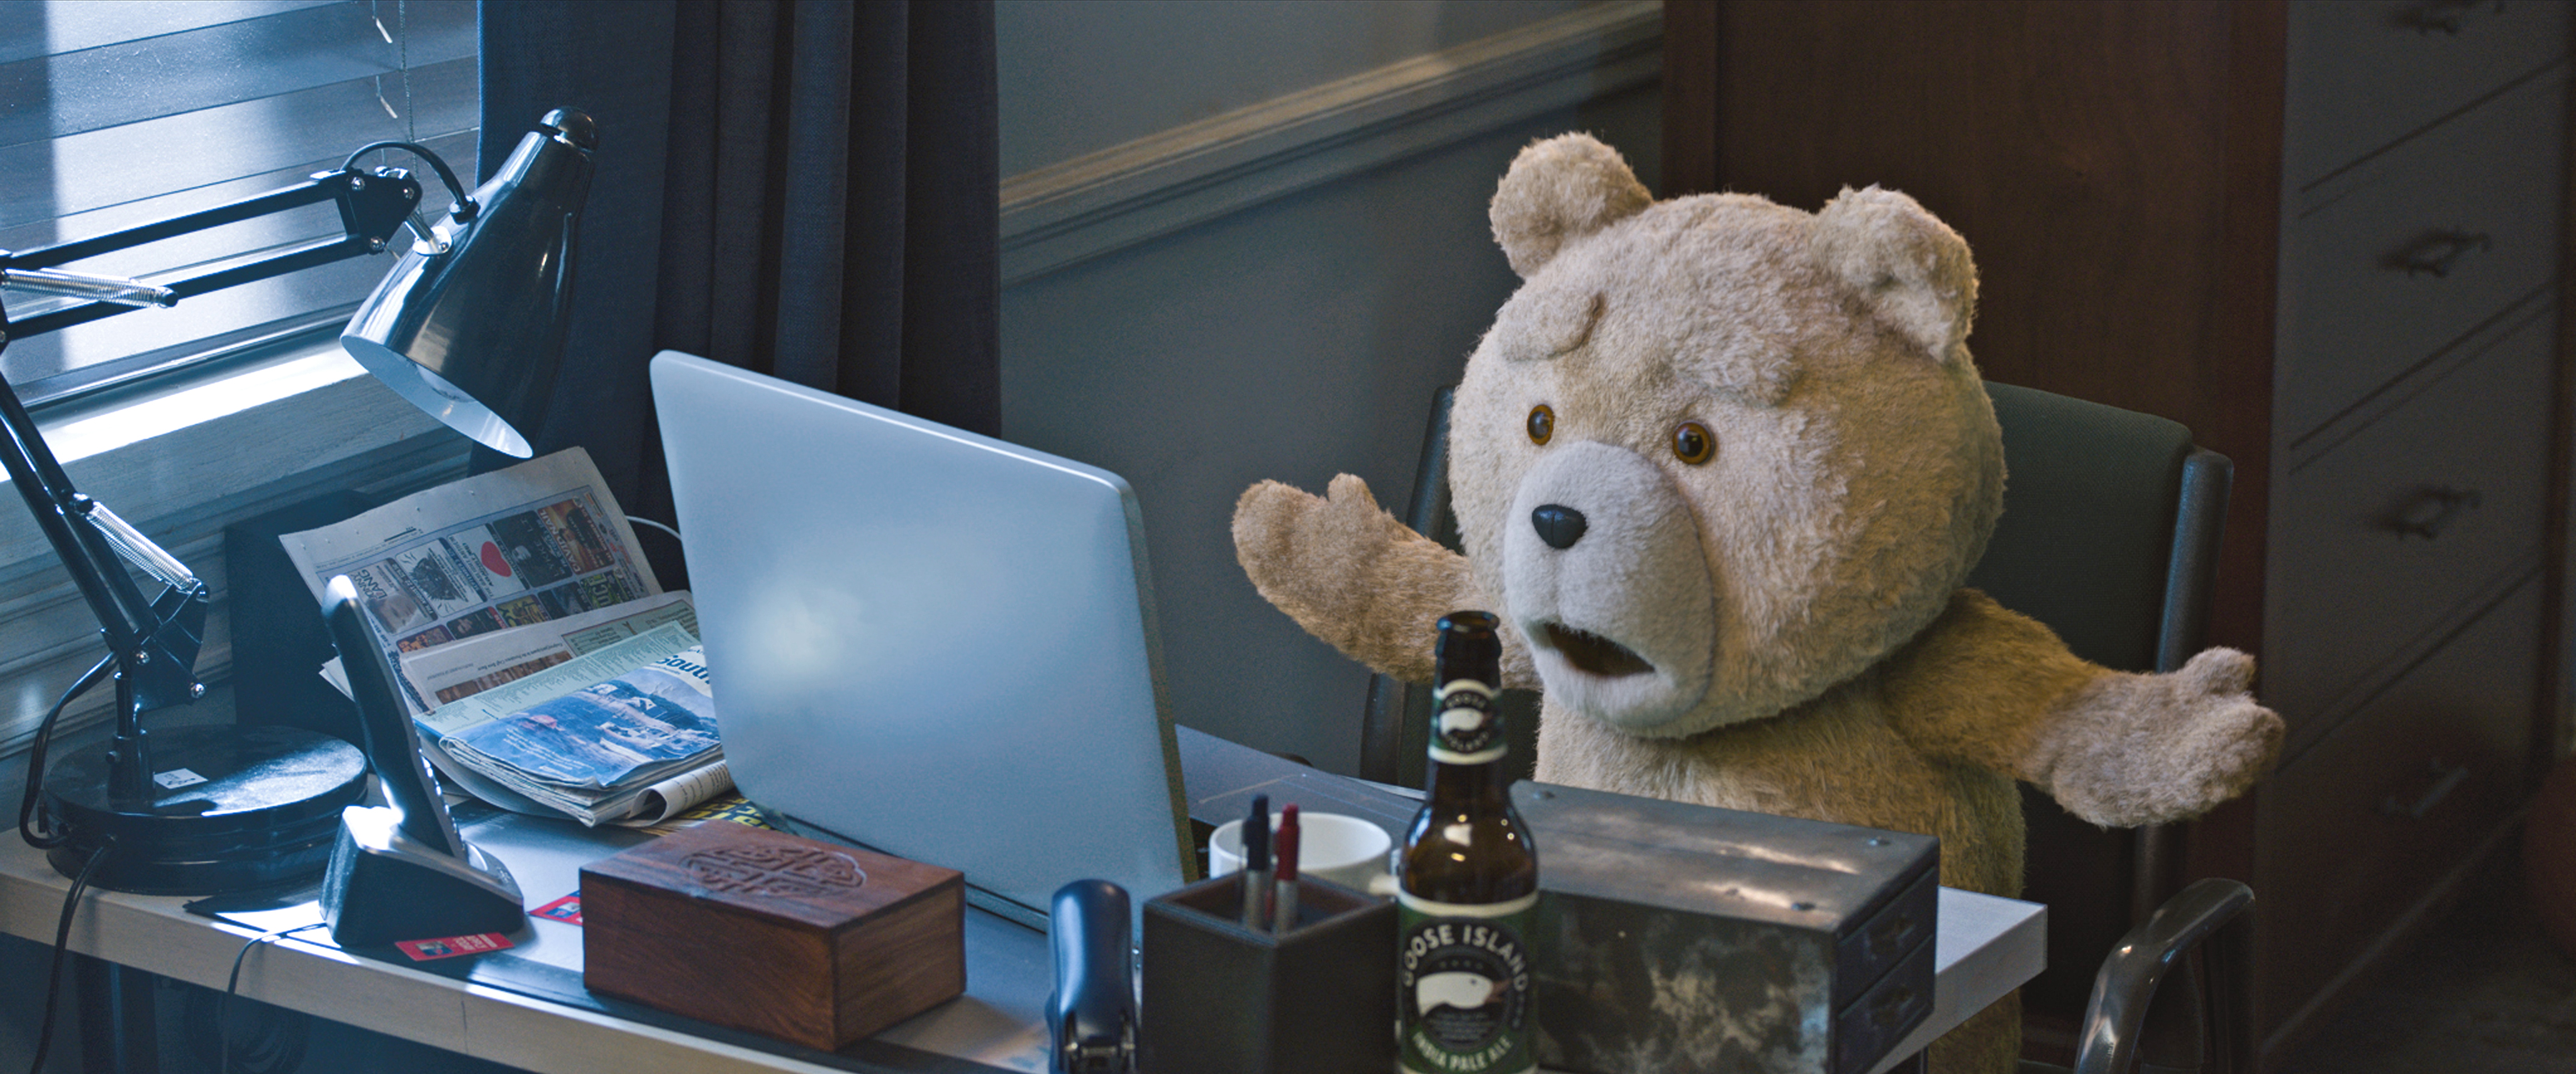 movie, ted 2, desk, ted (movie character), teddy bear